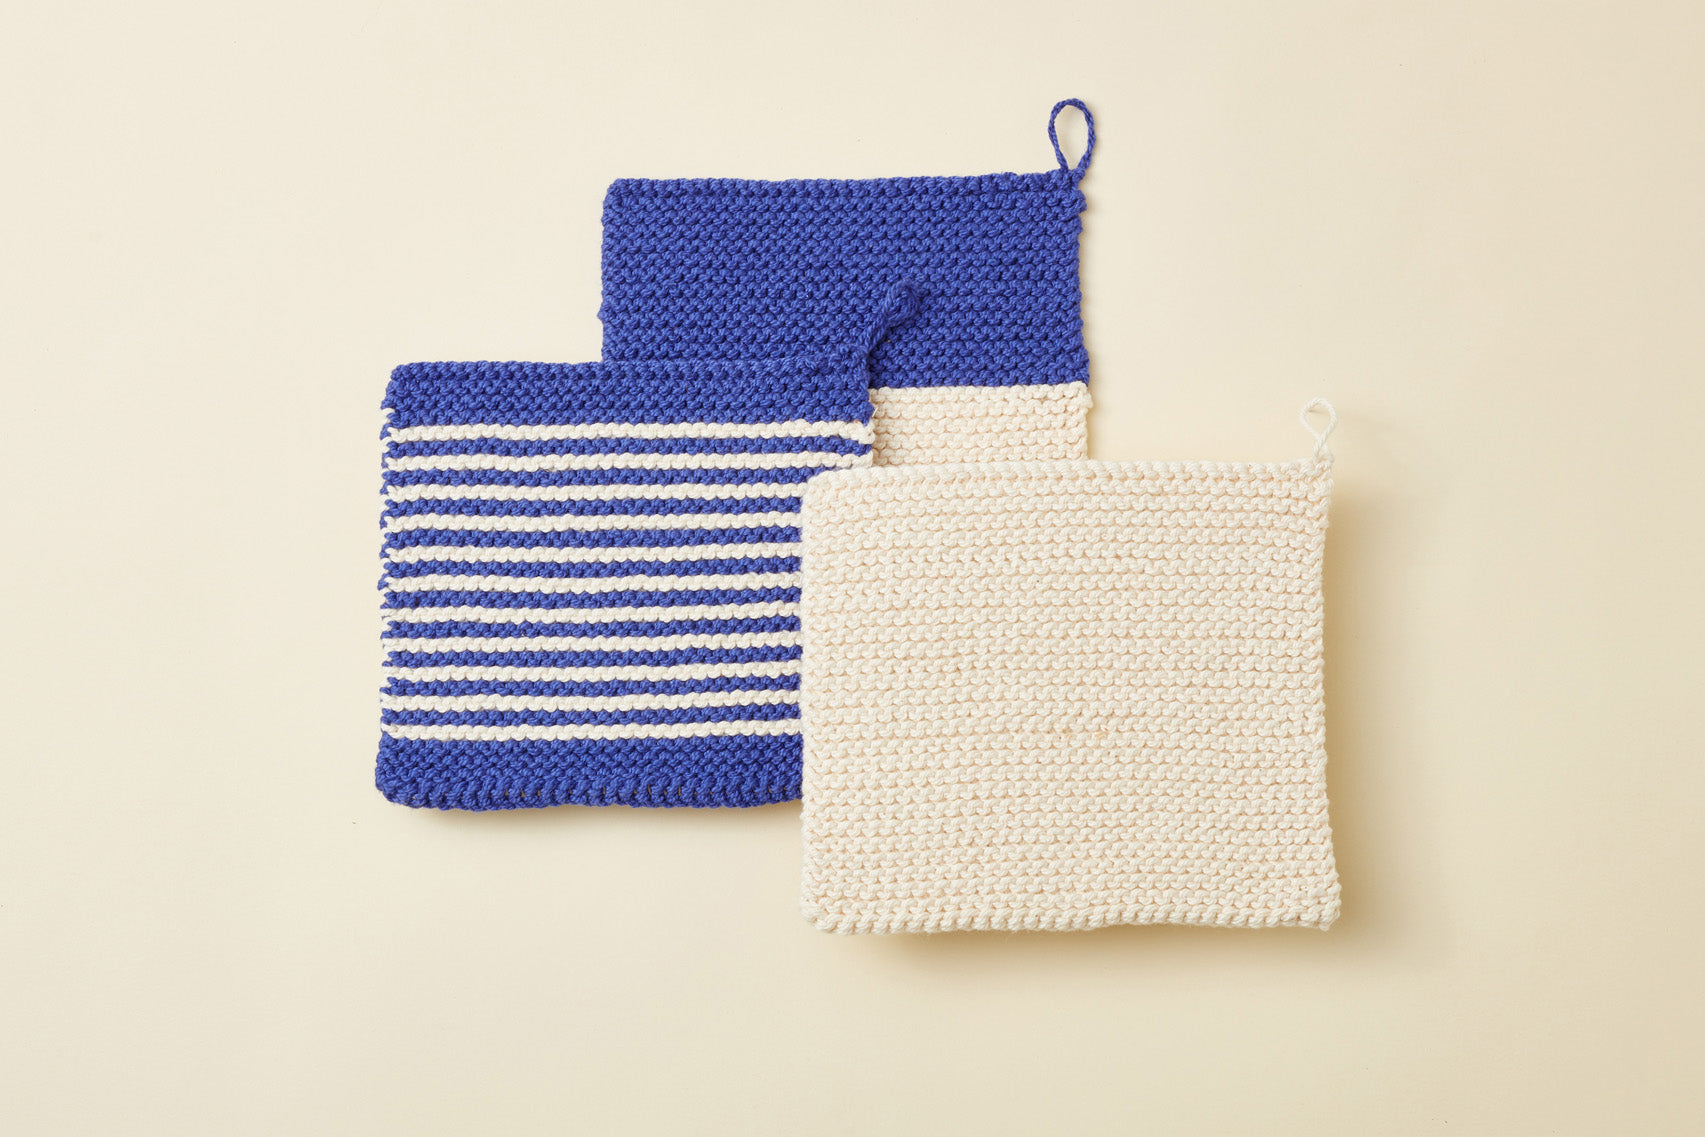 Discover Knitting - Kit & Video Learning With 3 Projects By Grace